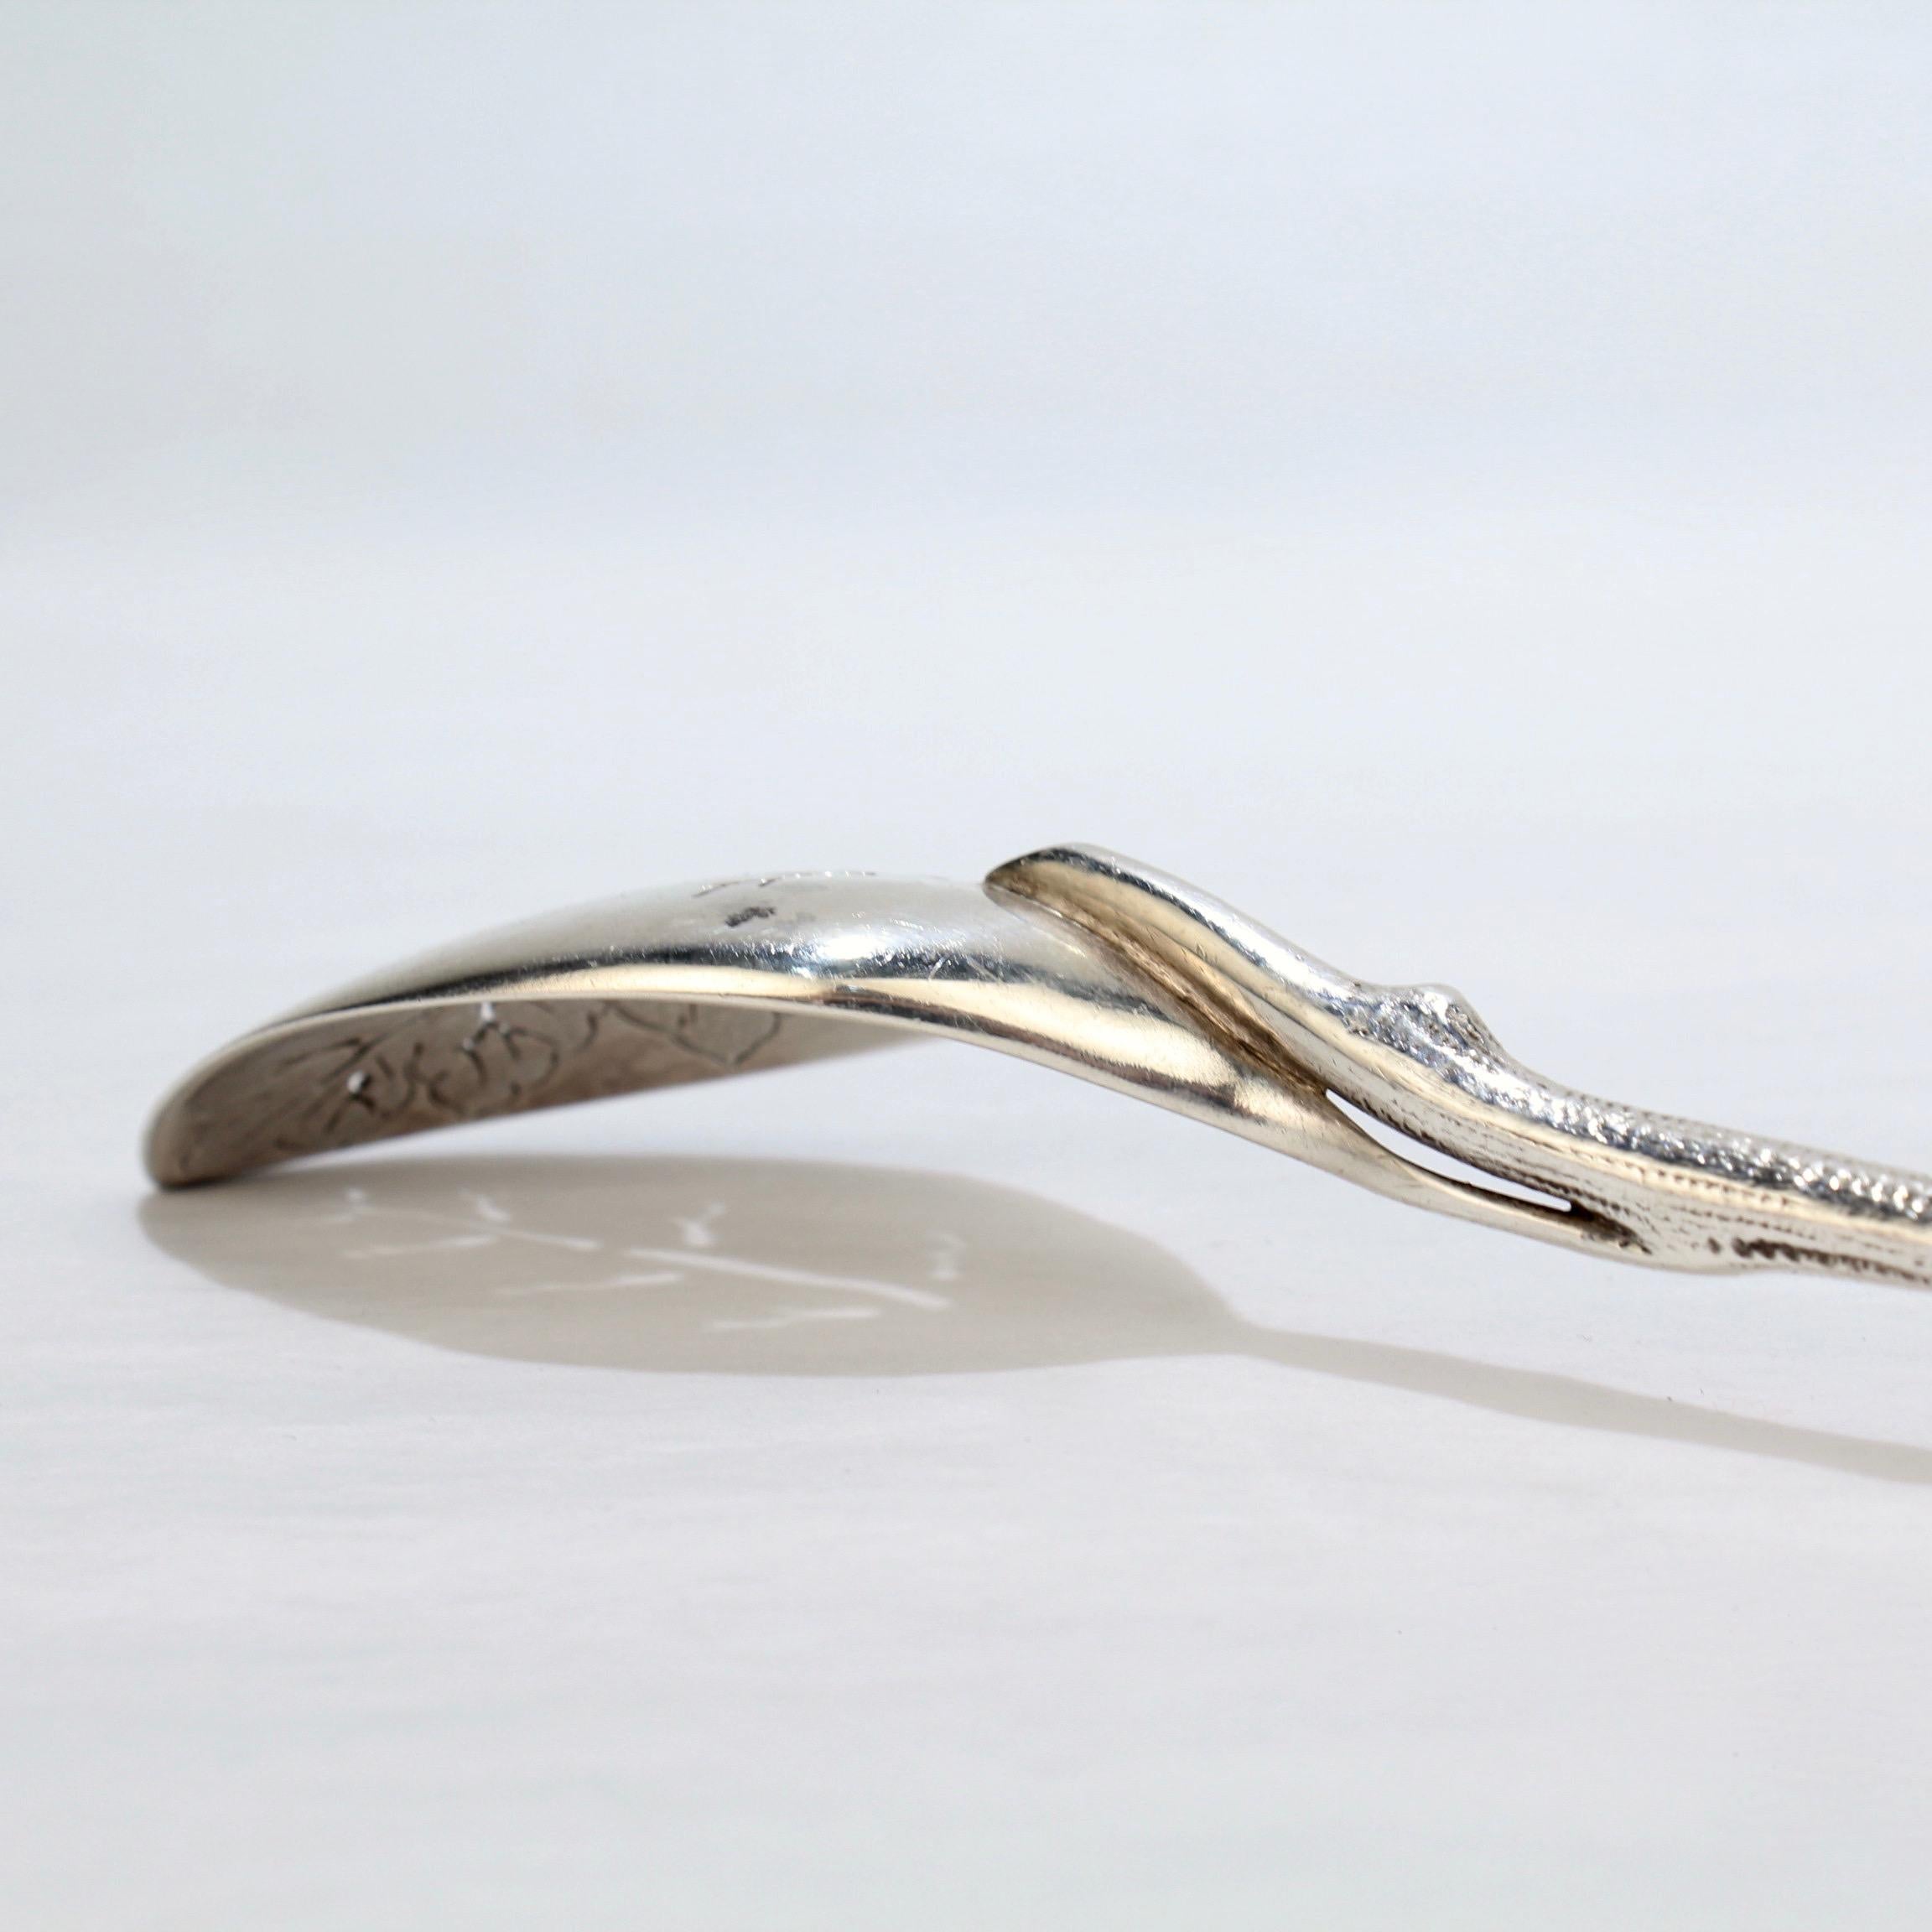 Antique Gorham Sterling Silver Aesthetic Period Figural Olive Spear and Spoon For Sale 2